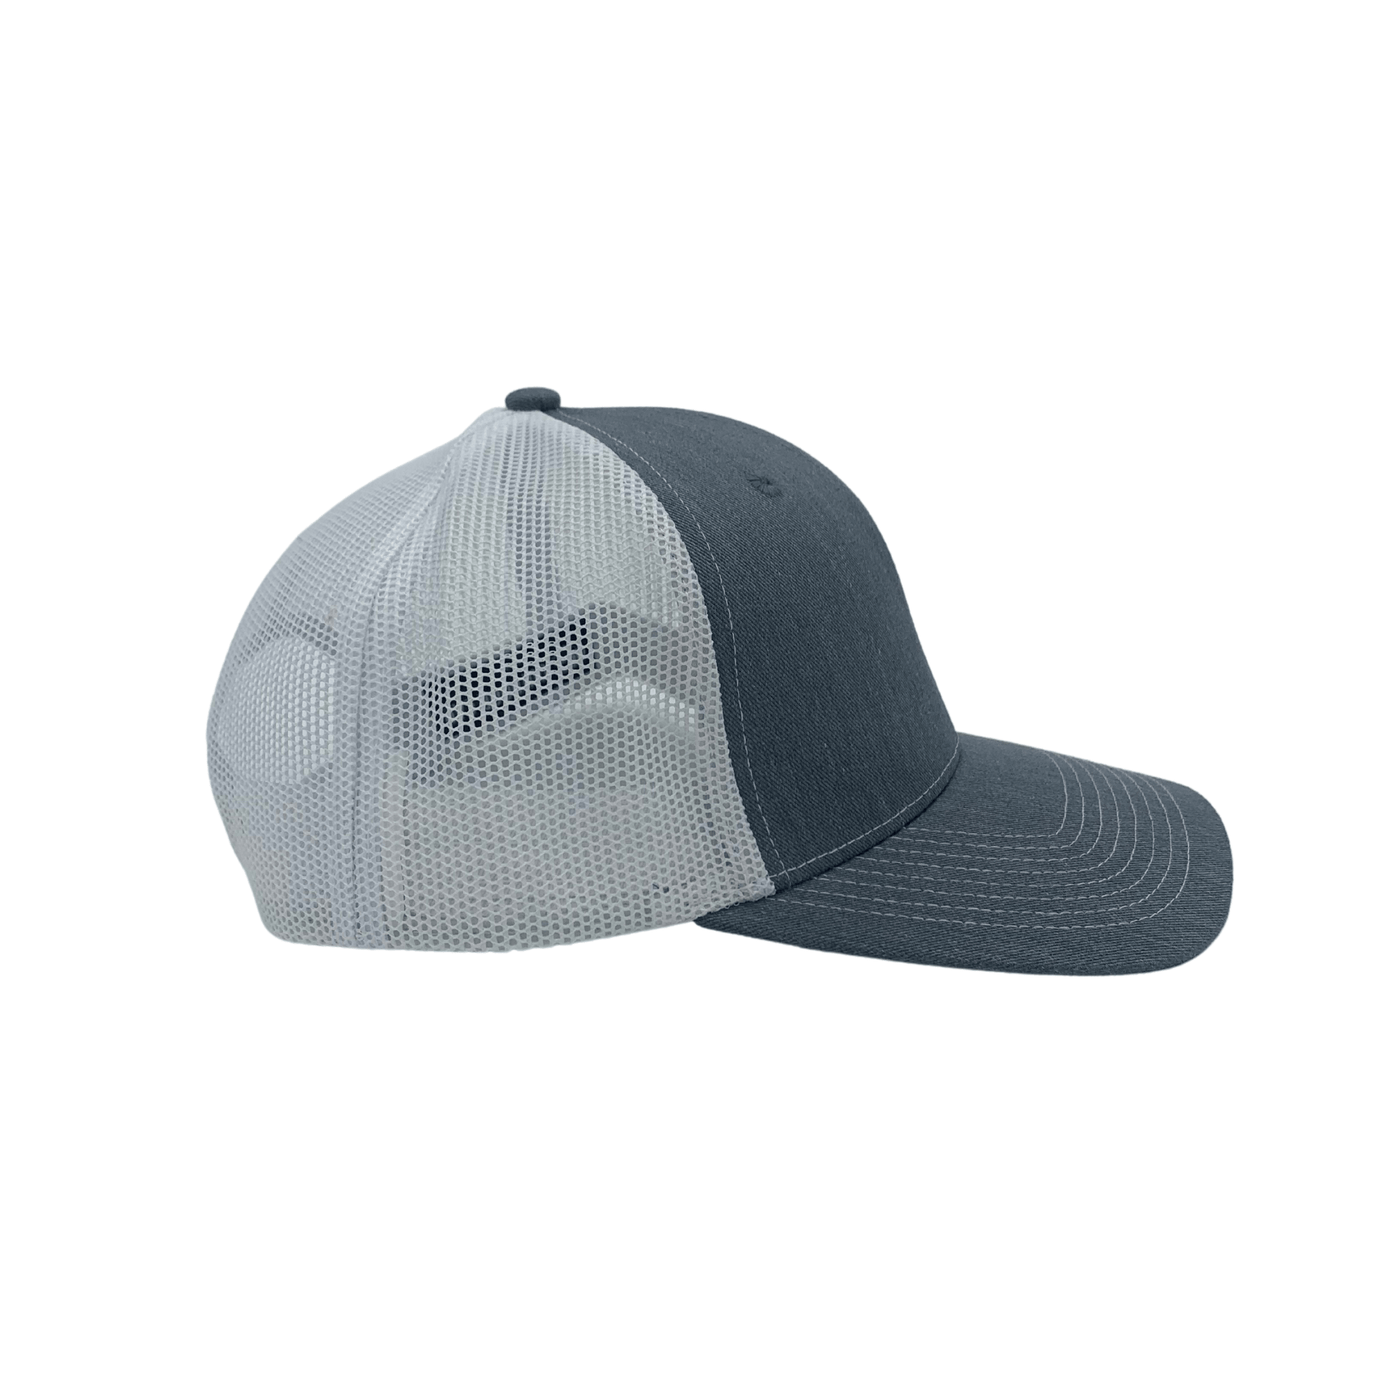 Embroidered Logo Cap--Gray with White Back - Carry The Load Shop